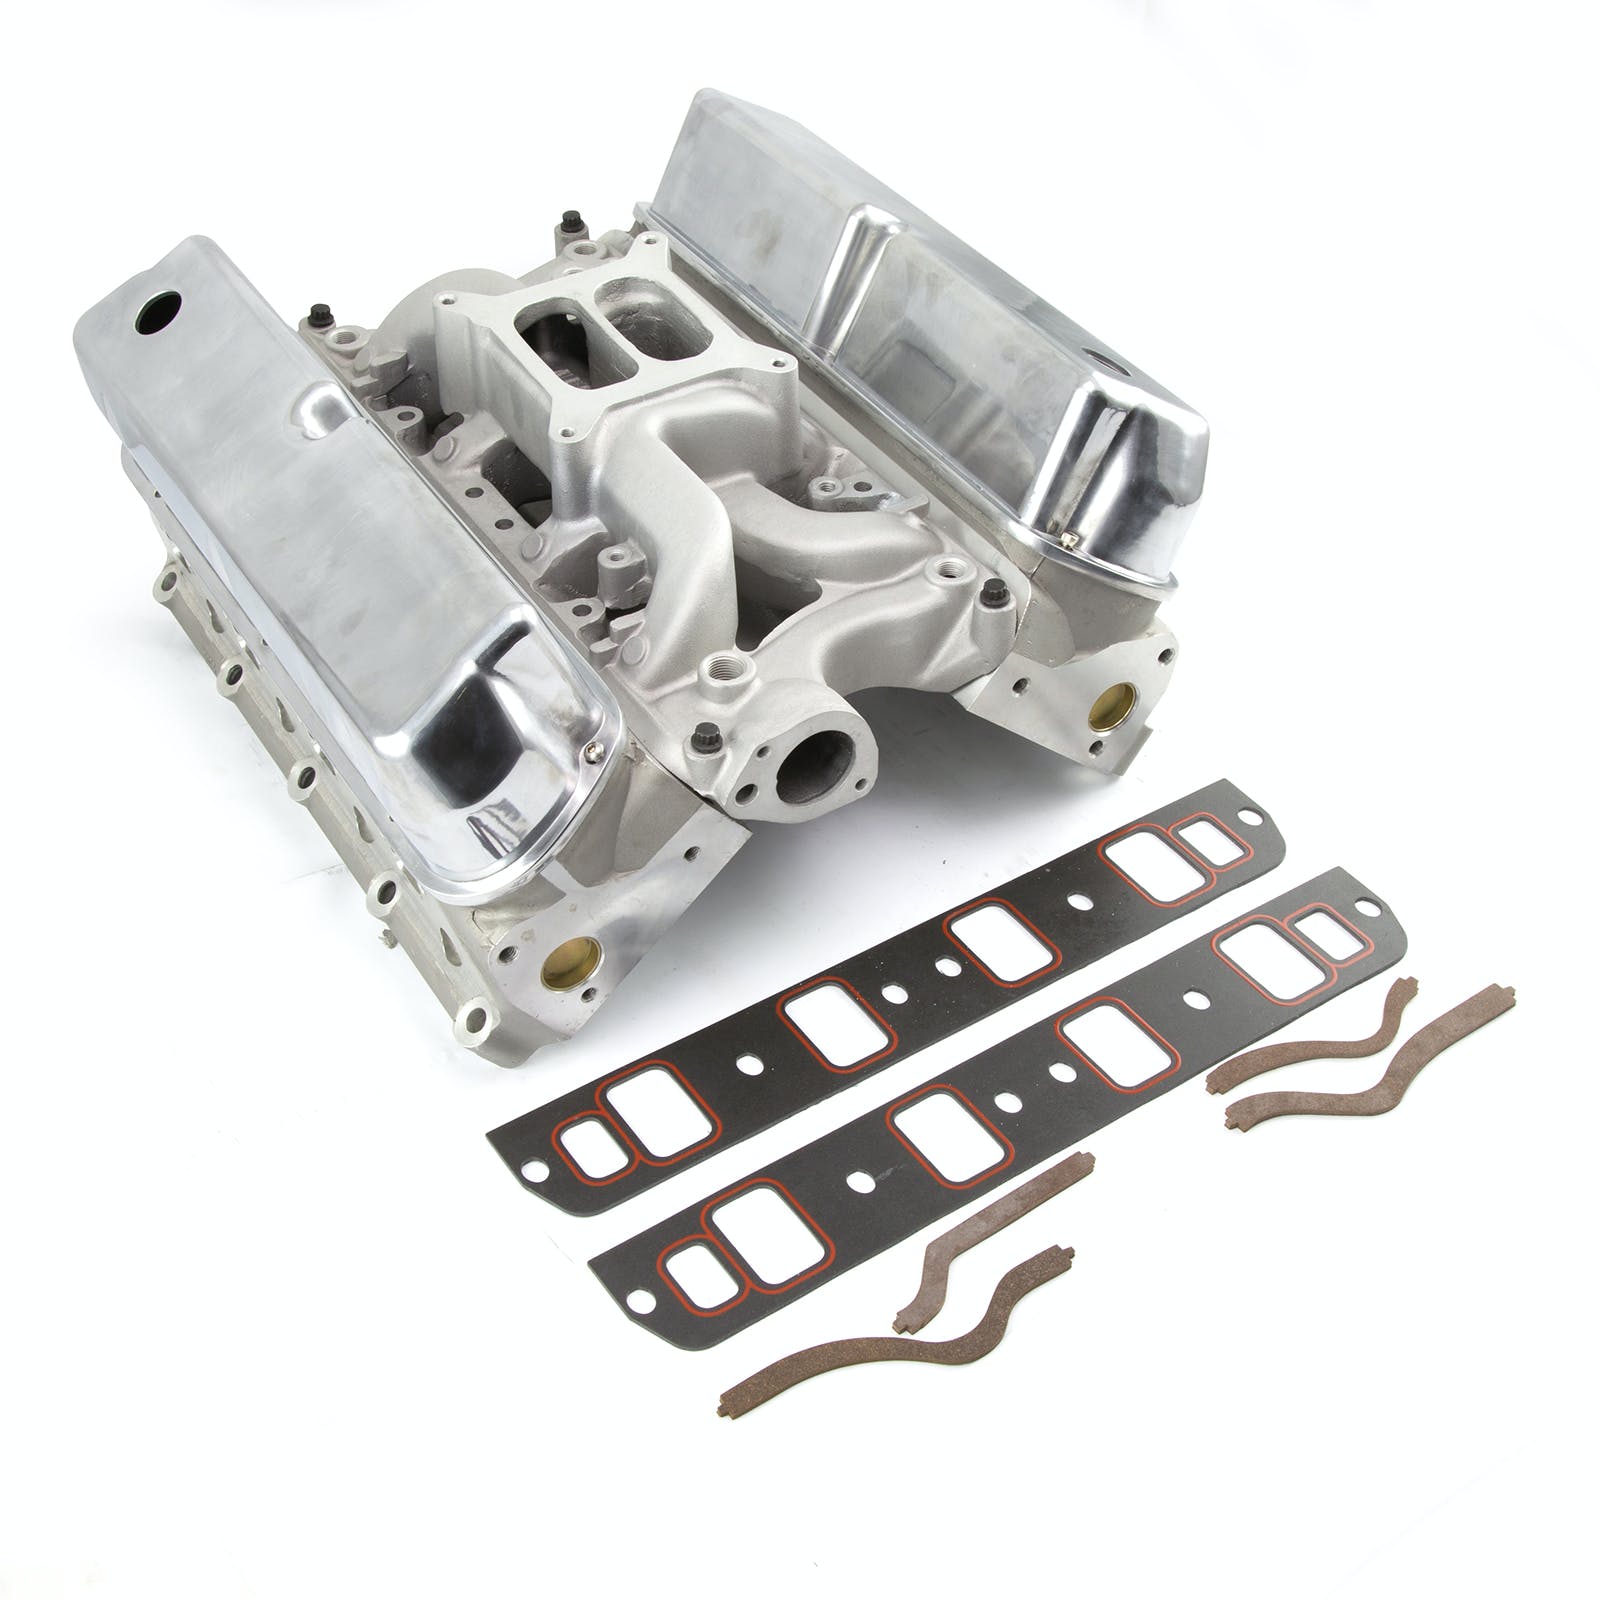 Speedmaster PCE435.1026 Solid FT 210cc Cylinder Head Top End Engine Combo Kit